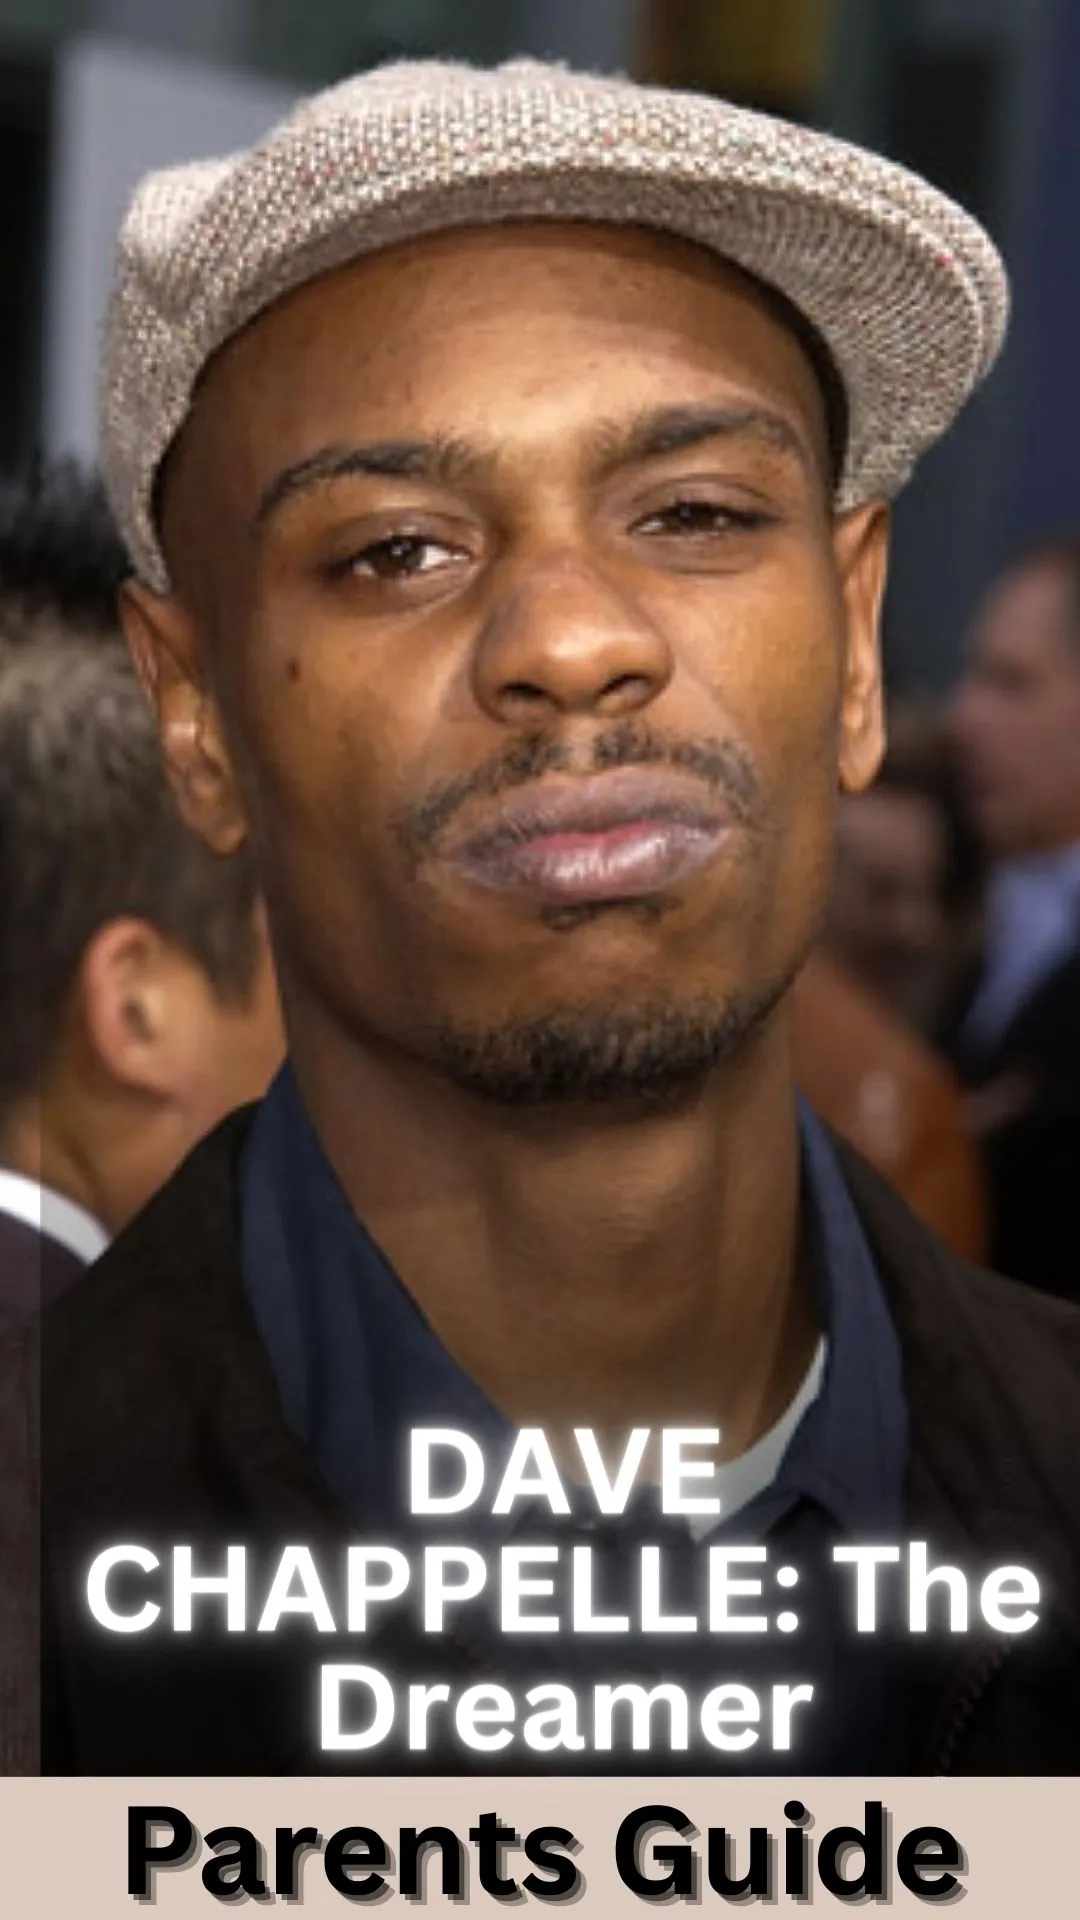 DAVE CHAPPELLE: The Dreamer Parents Guide (1)